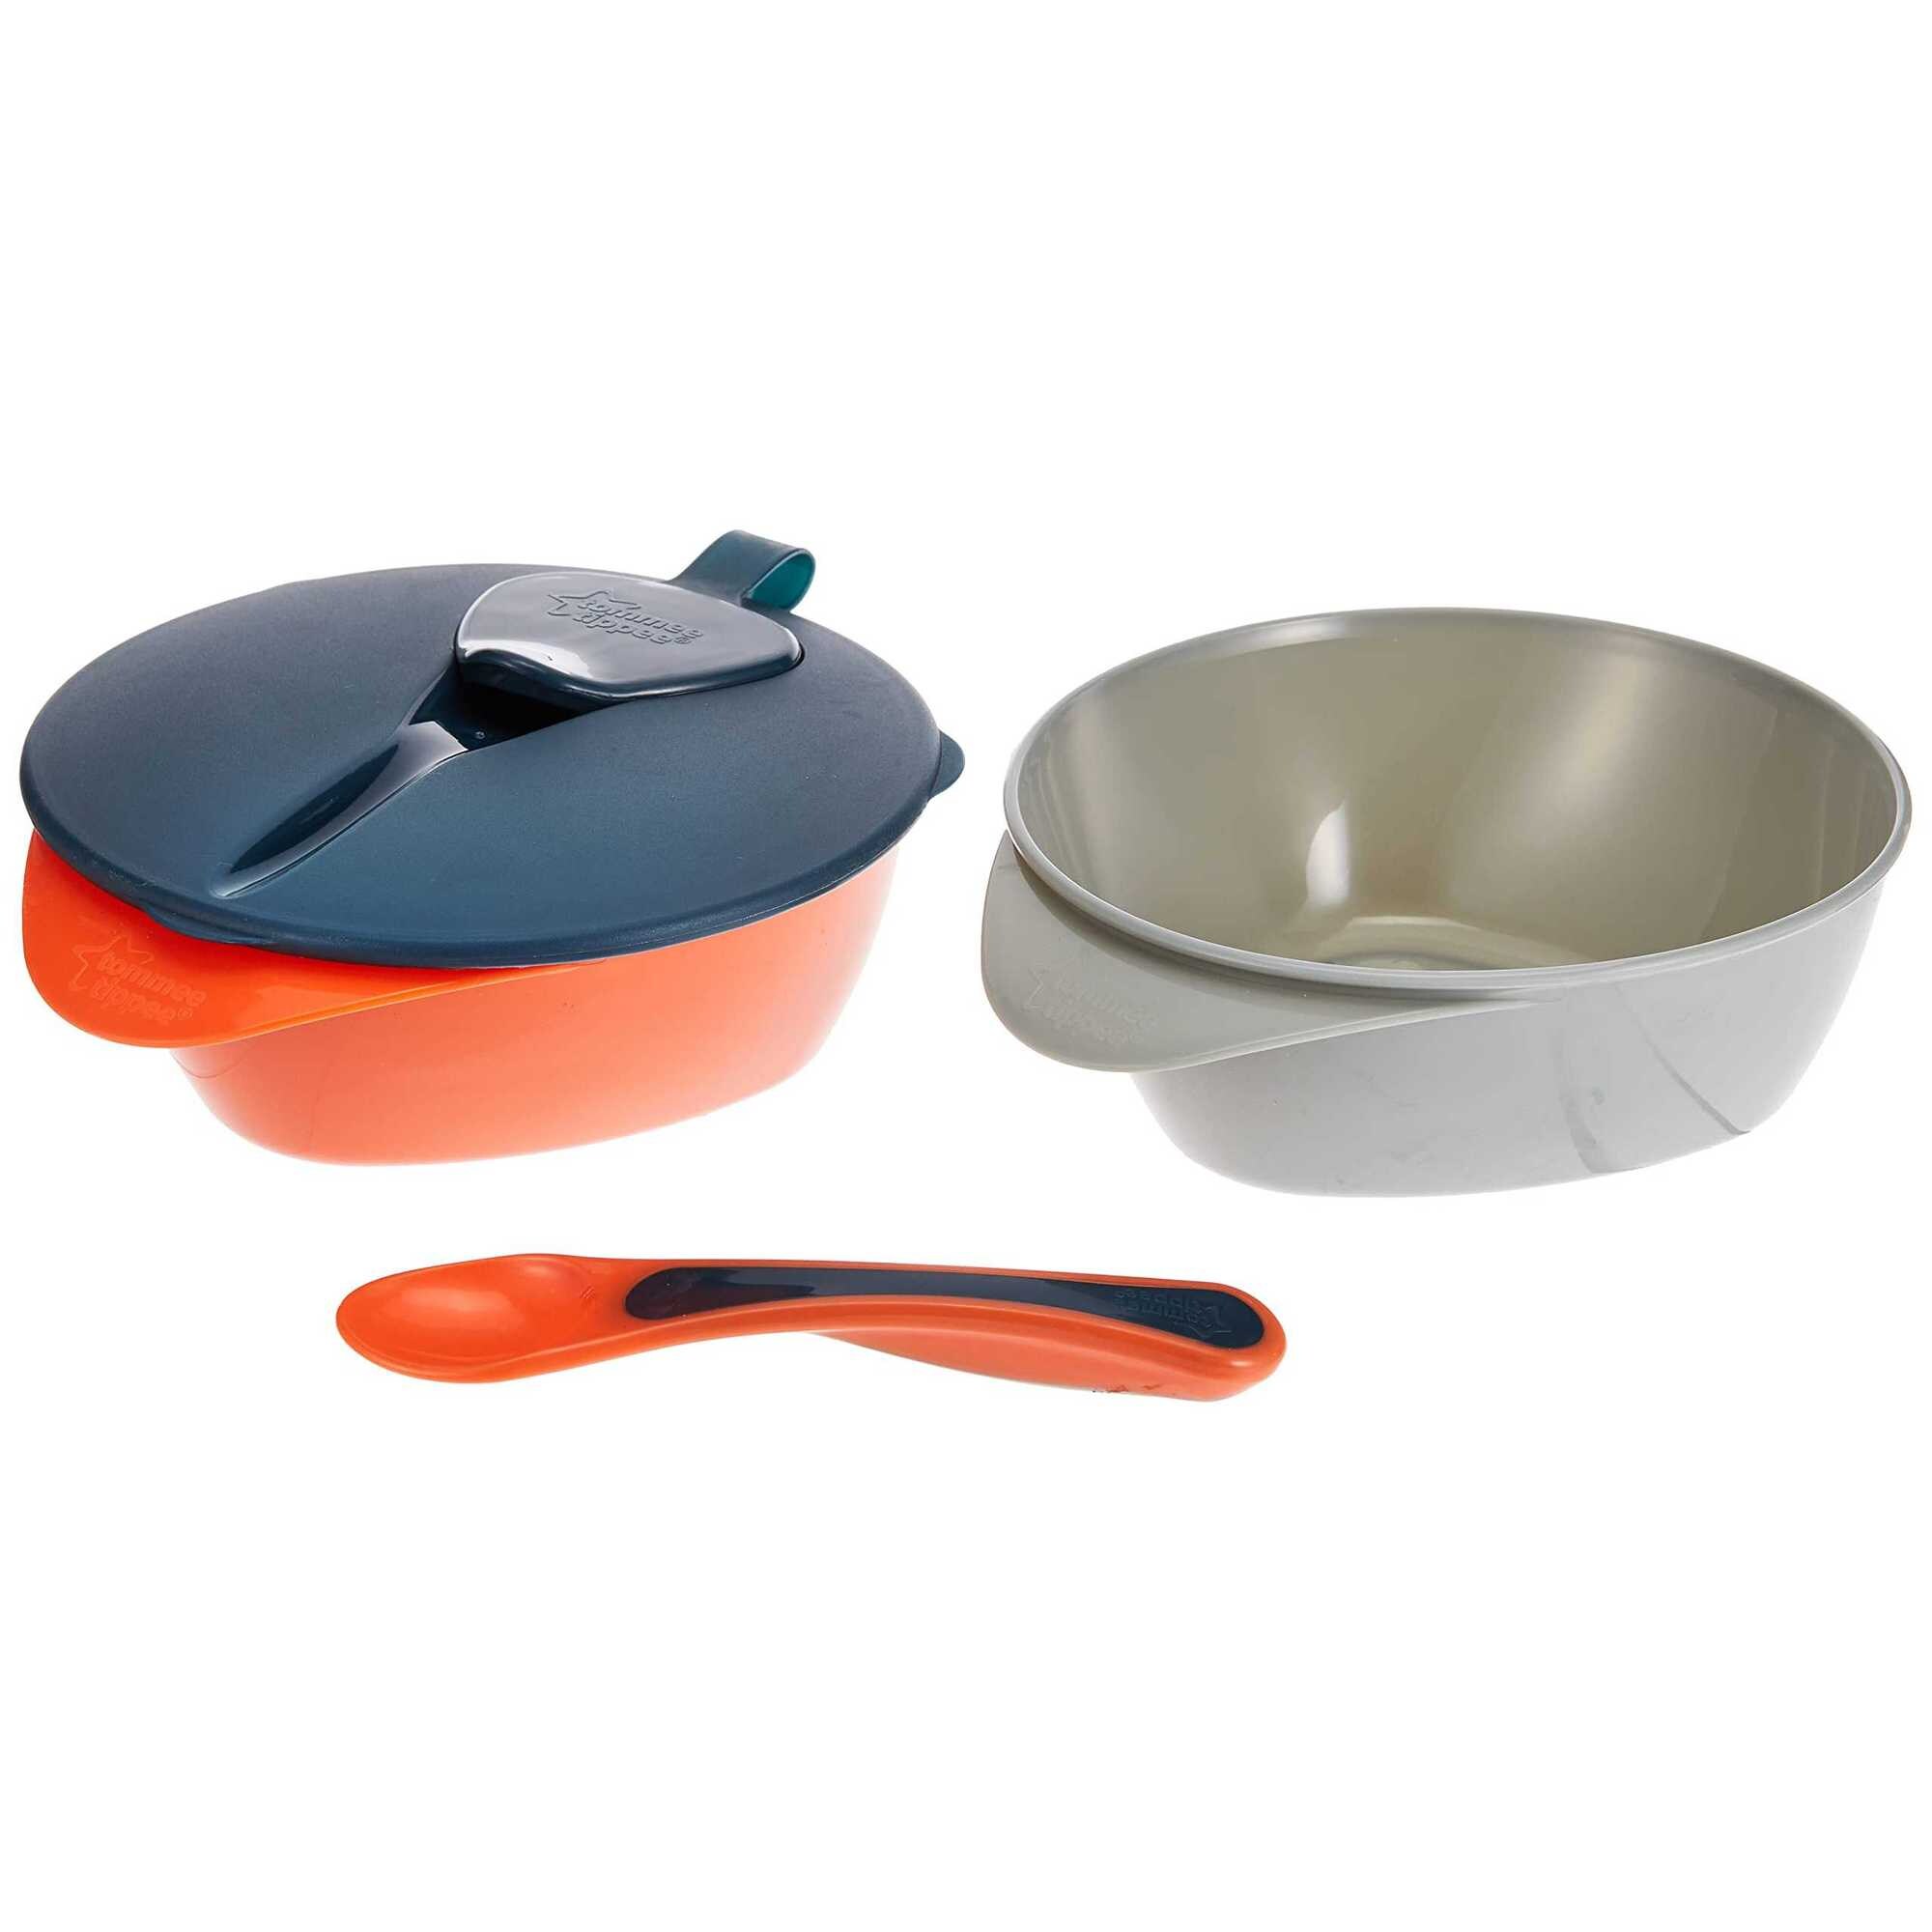 Tommee Tippee On The Go Feeding Bowl with Lid & Spoon - Set of 2